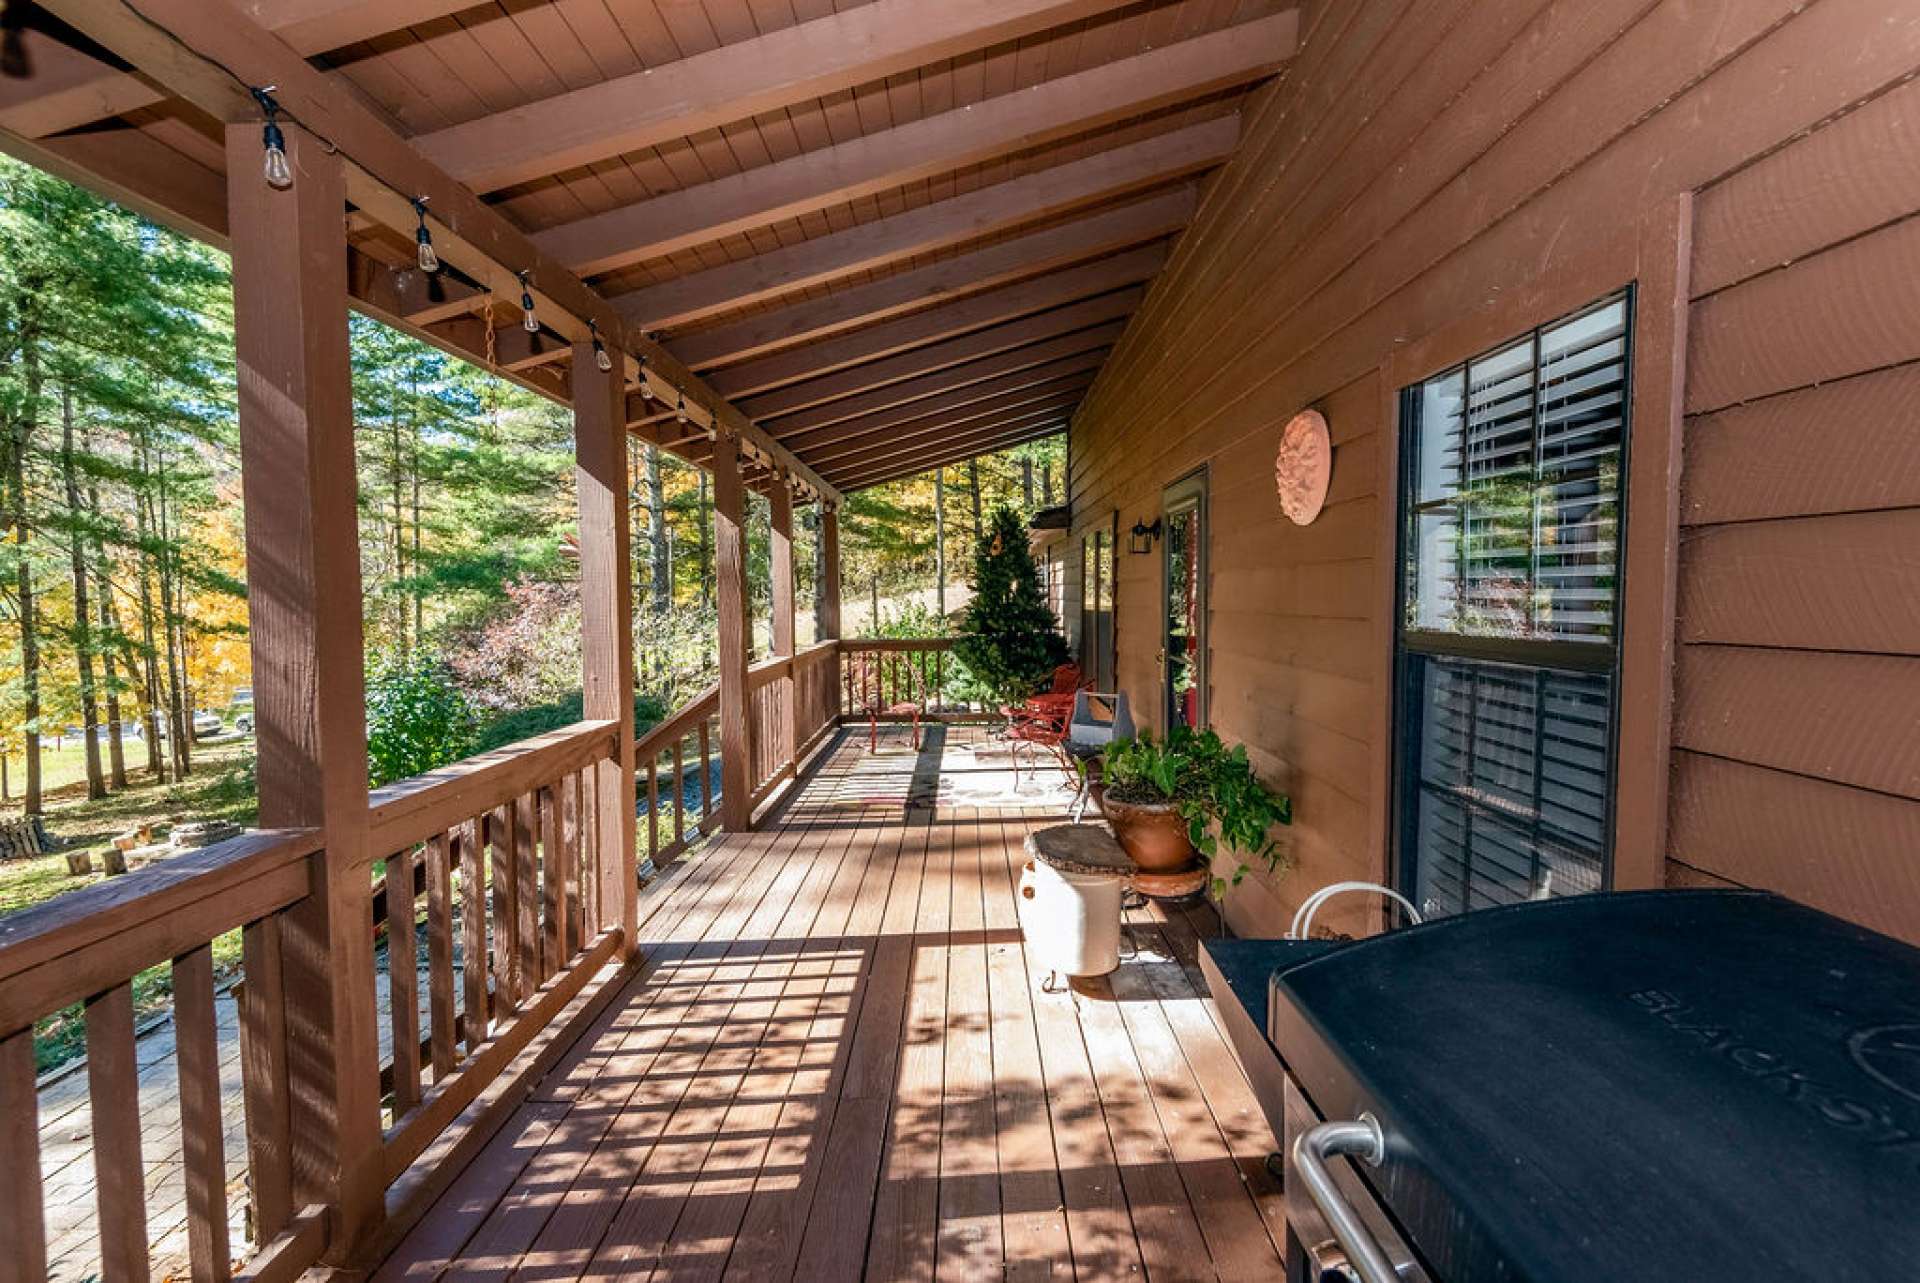 A spacious front porch invites you and guests to relax and enjoy mountain living.